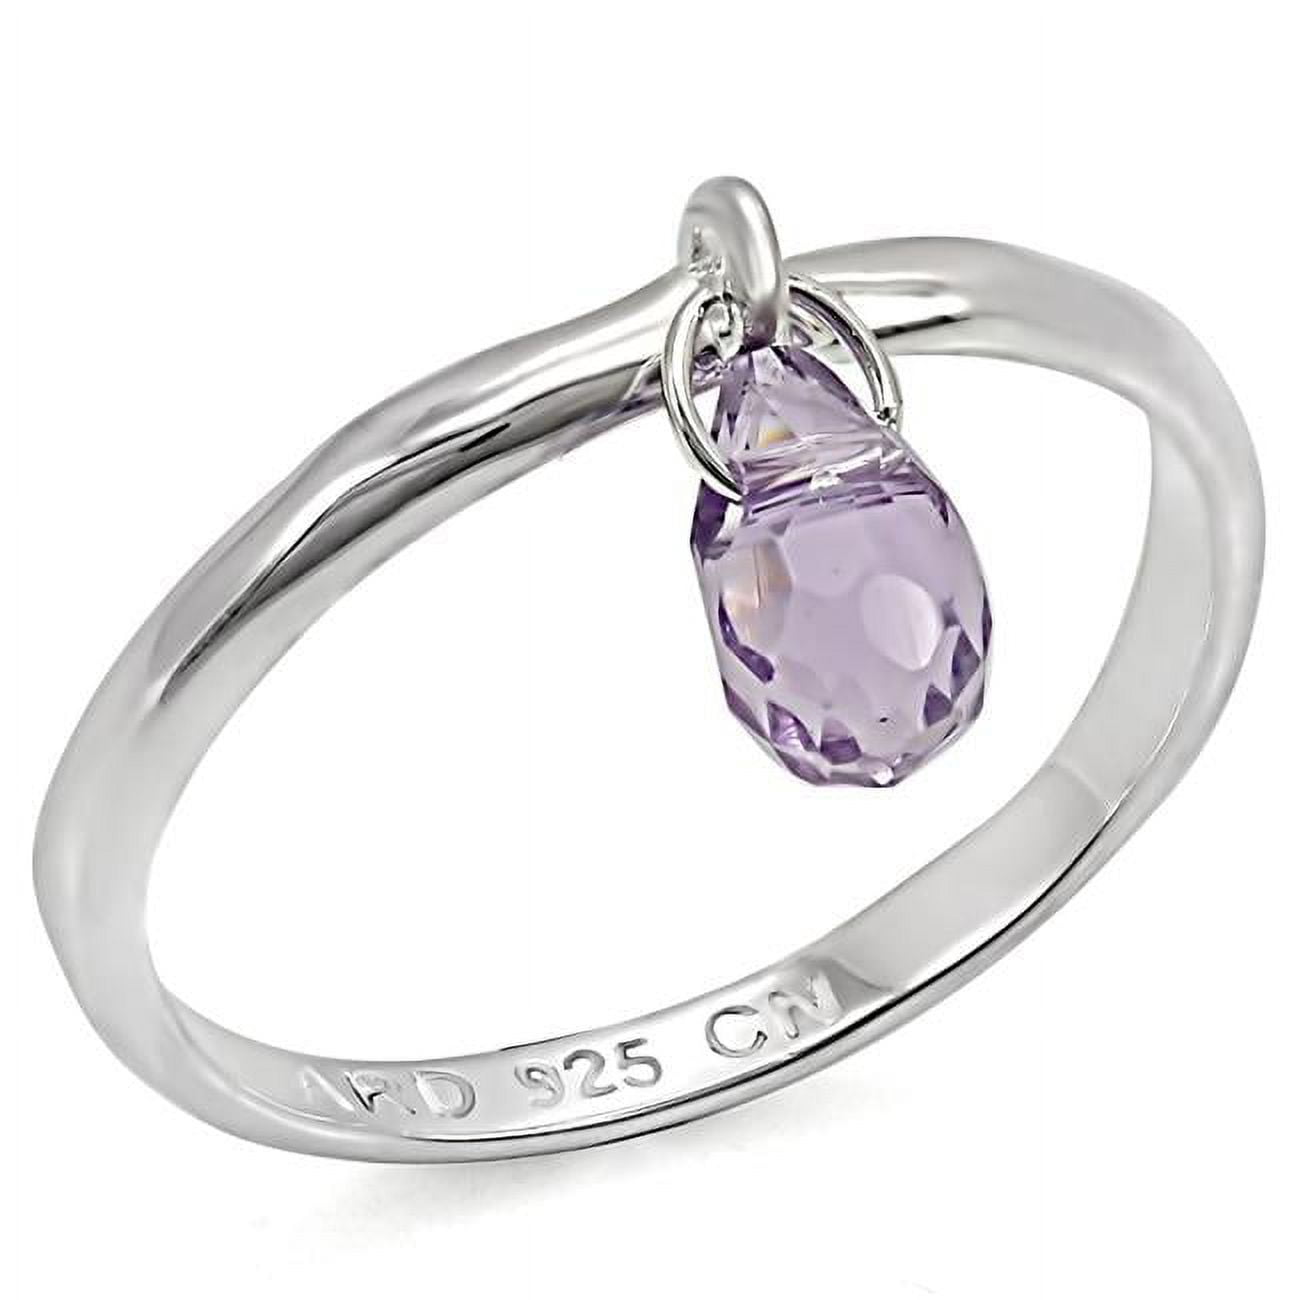 Picture of Alamode LOS325-10 Women Silver 925 Sterling Silver Ring with Genuine Stone in Amethyst - Size 10